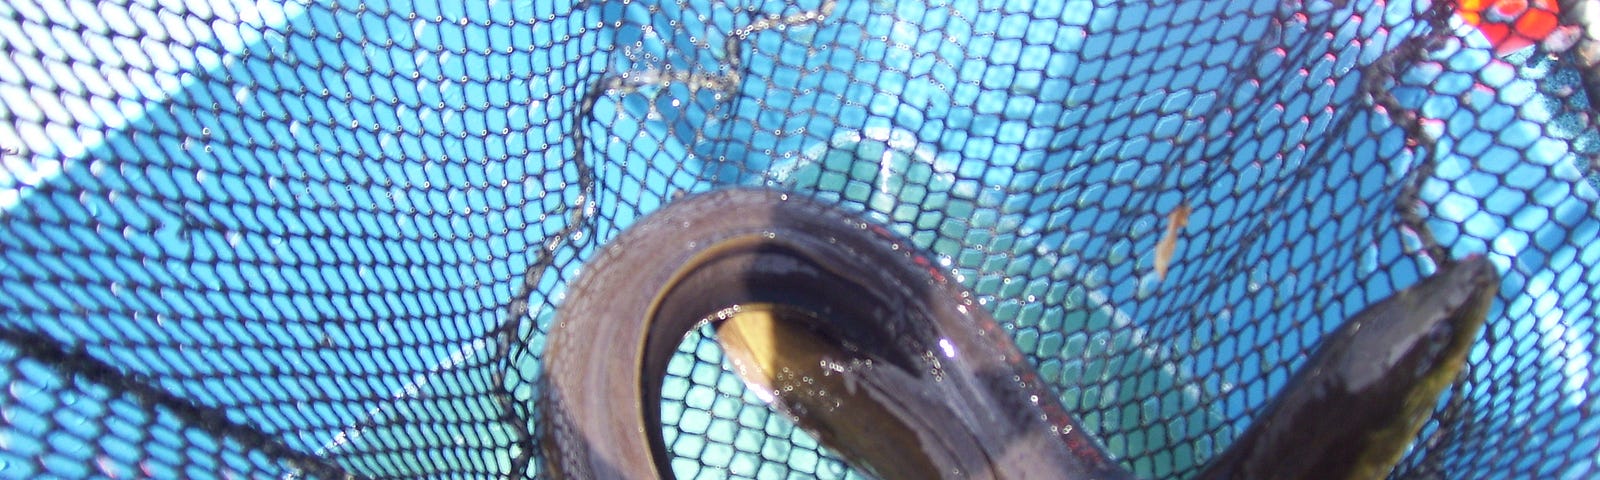 An eel in a net, held just above a blue plastic bin containing water.